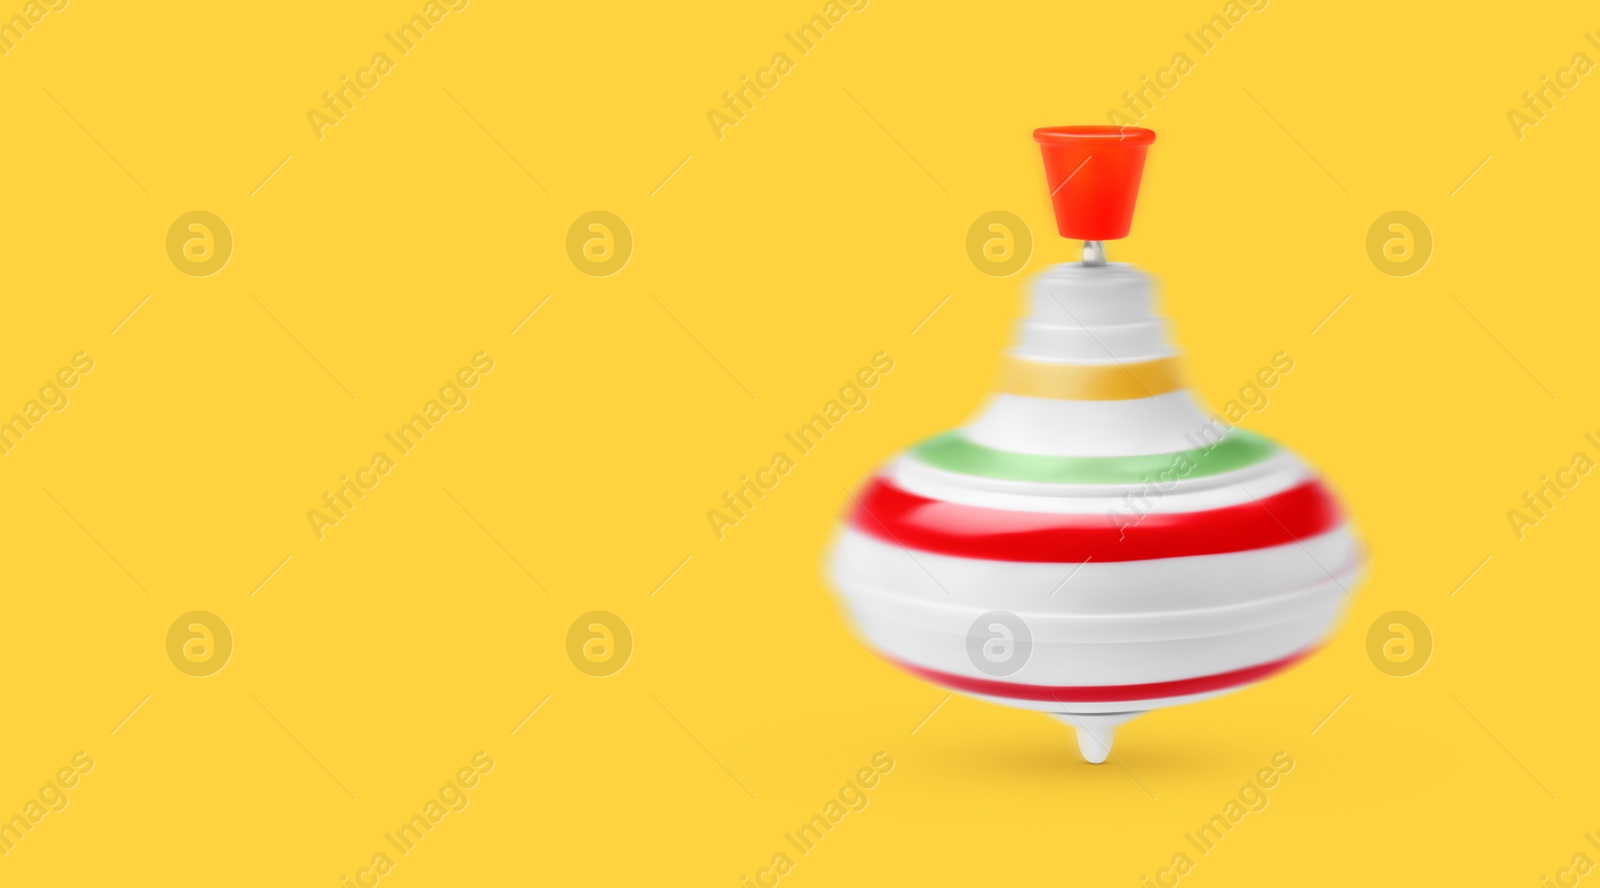 Image of One spinning top in motion on yellow background, banner design with space for text. Toy whirligig